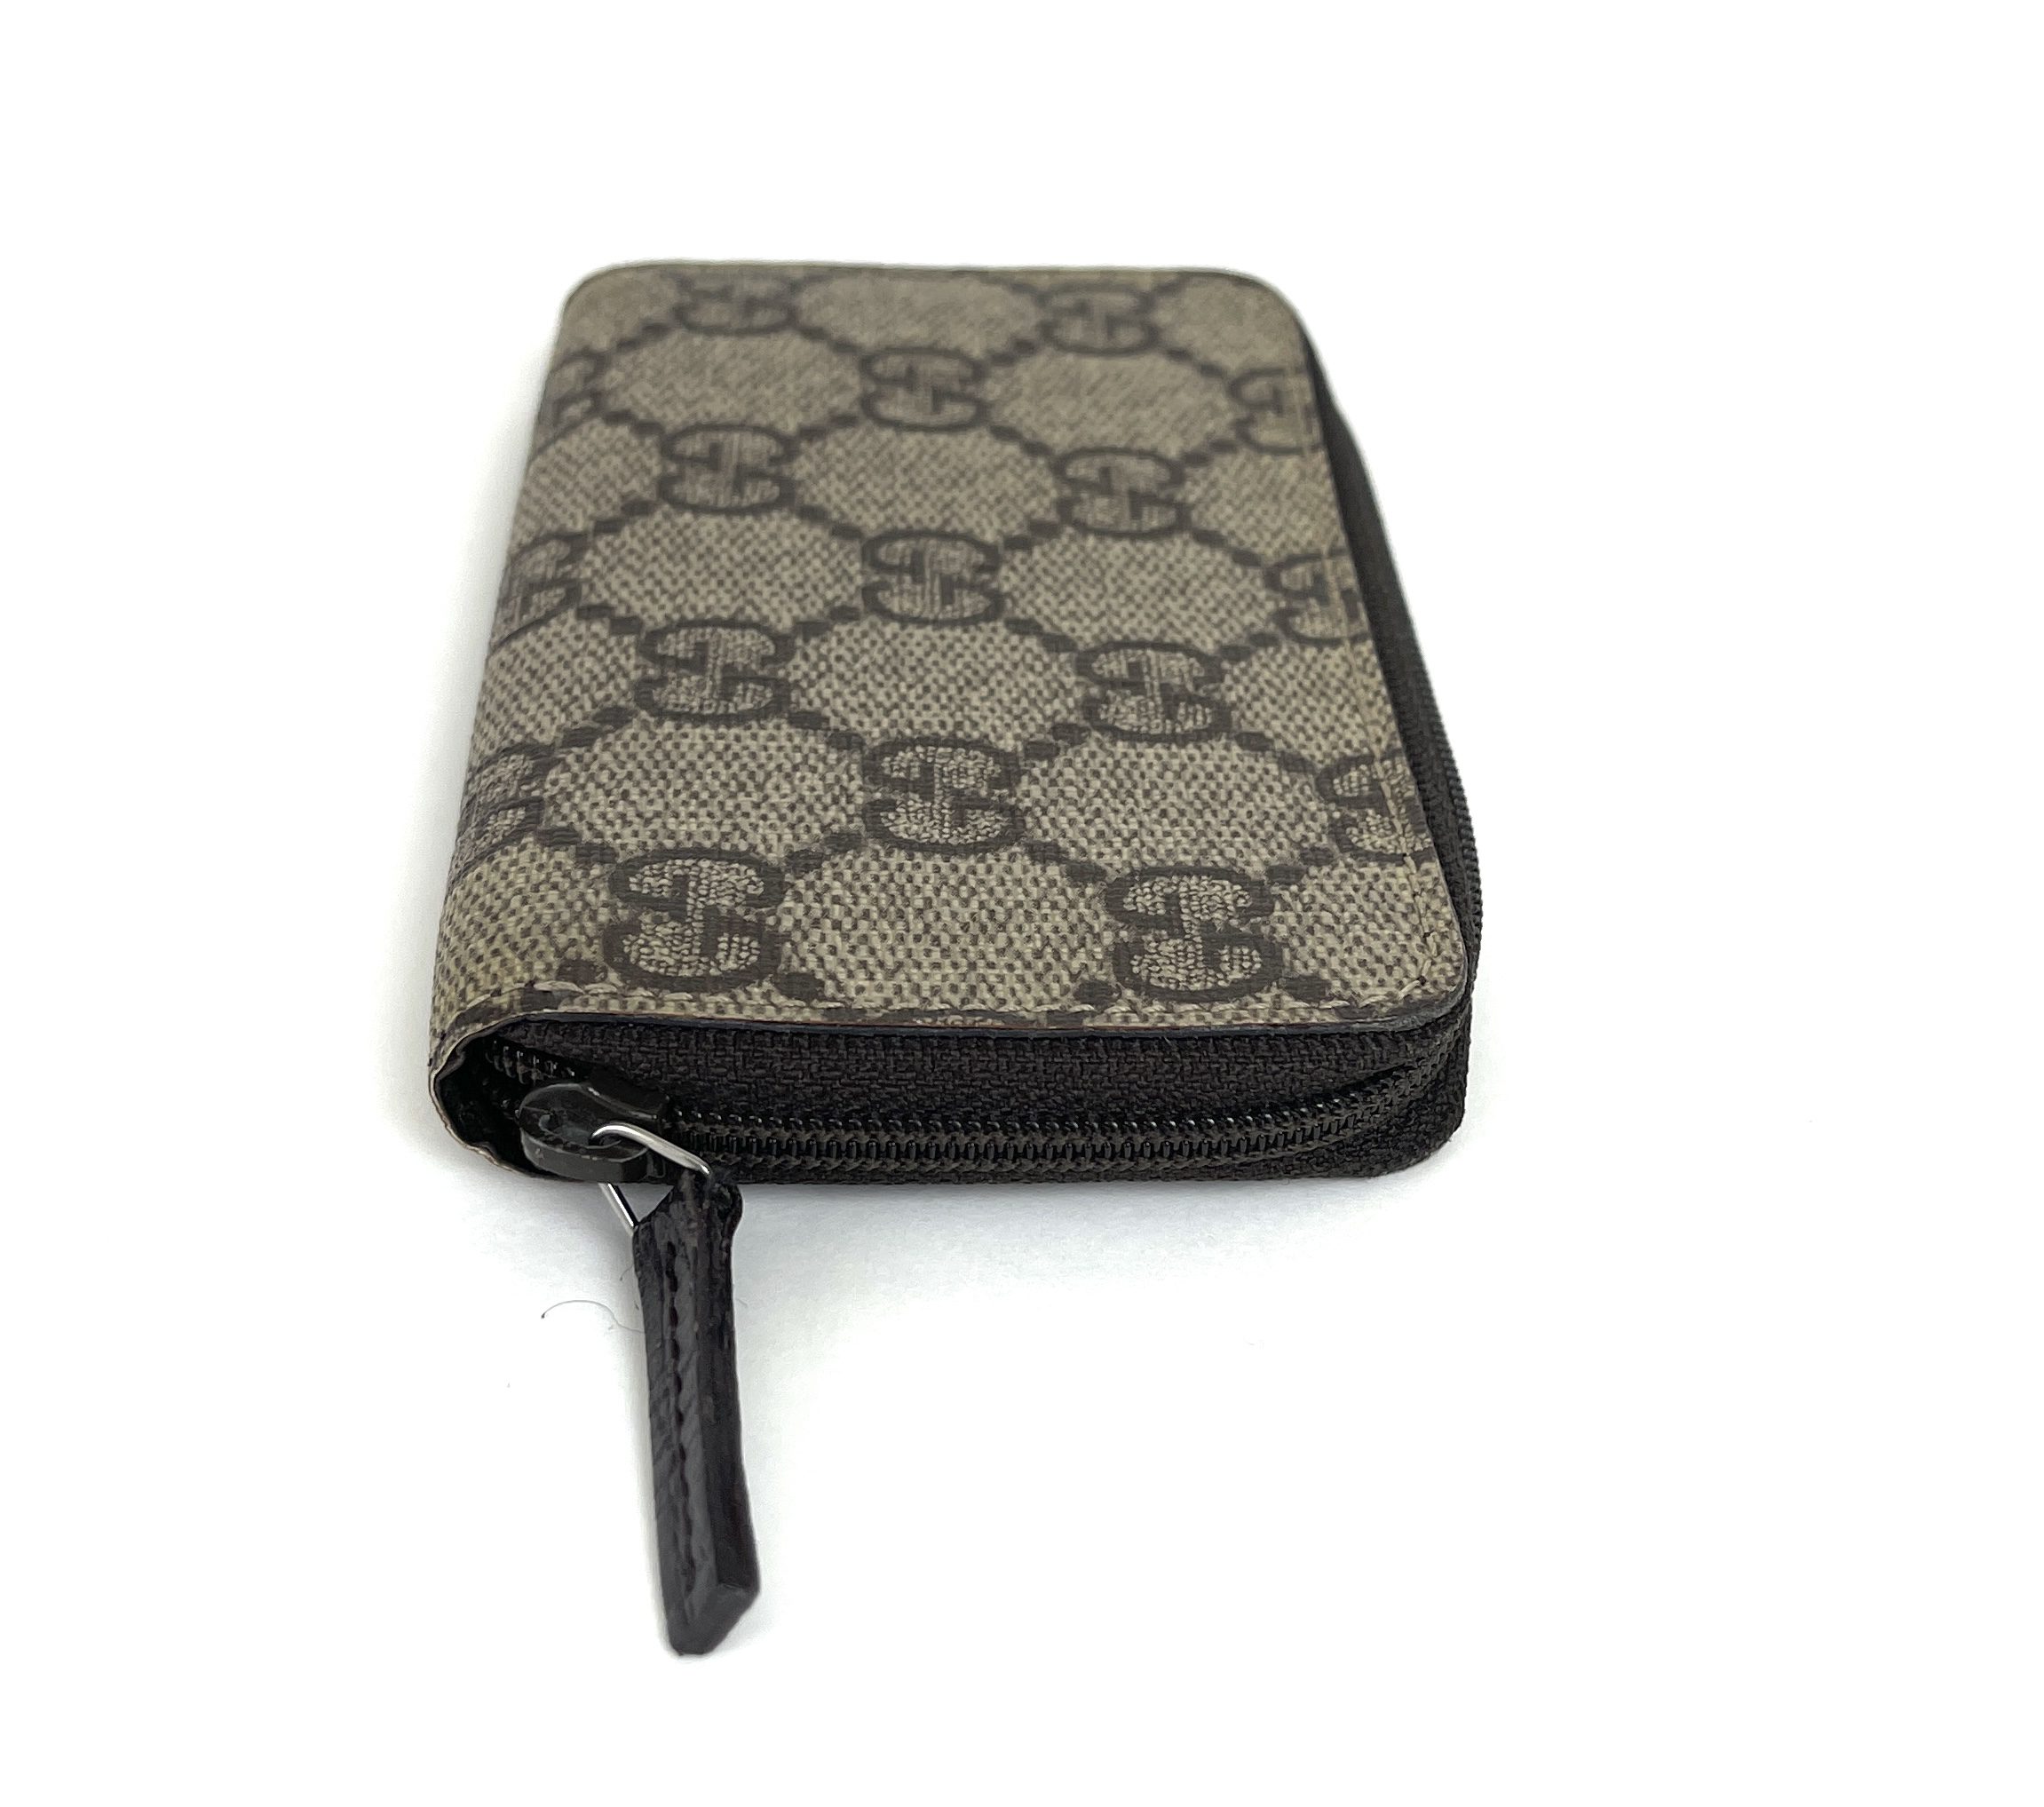 Gucci Bifold Wallet GG Supreme Web Black in Coated Canvas - US